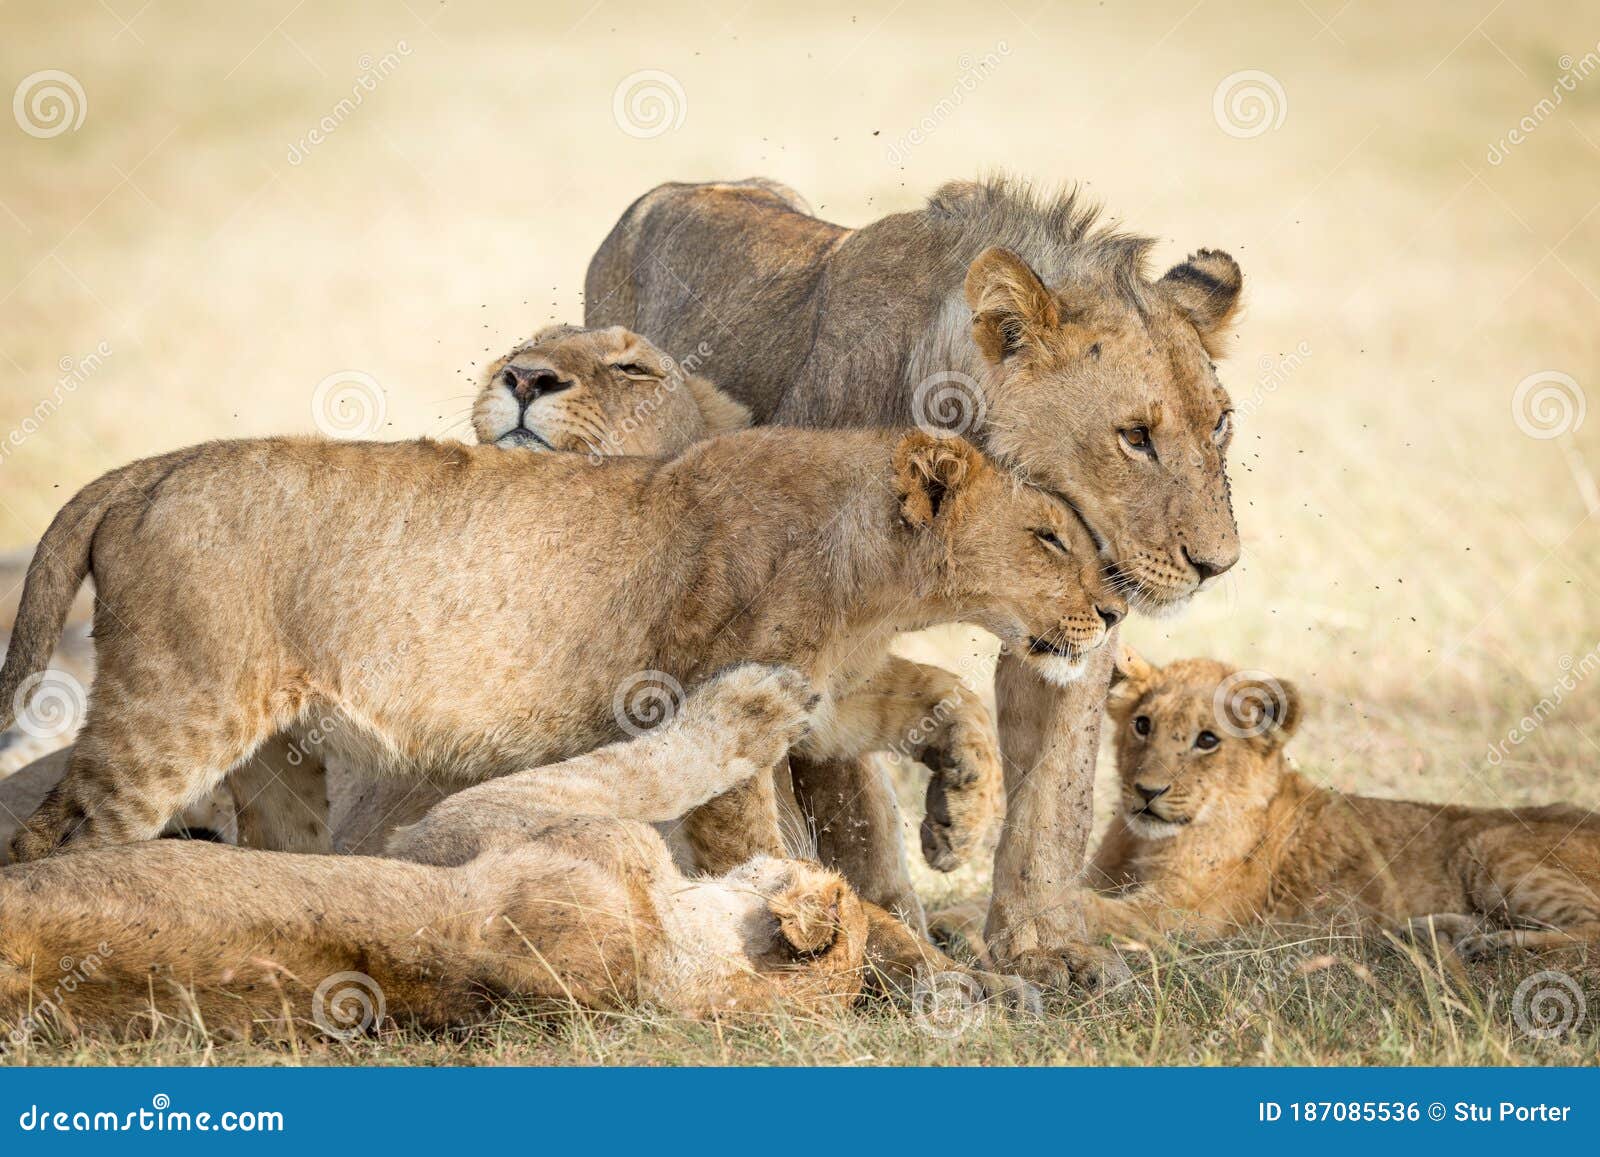 lion pride greeting each other and bonding showing affection in masai mara kenya